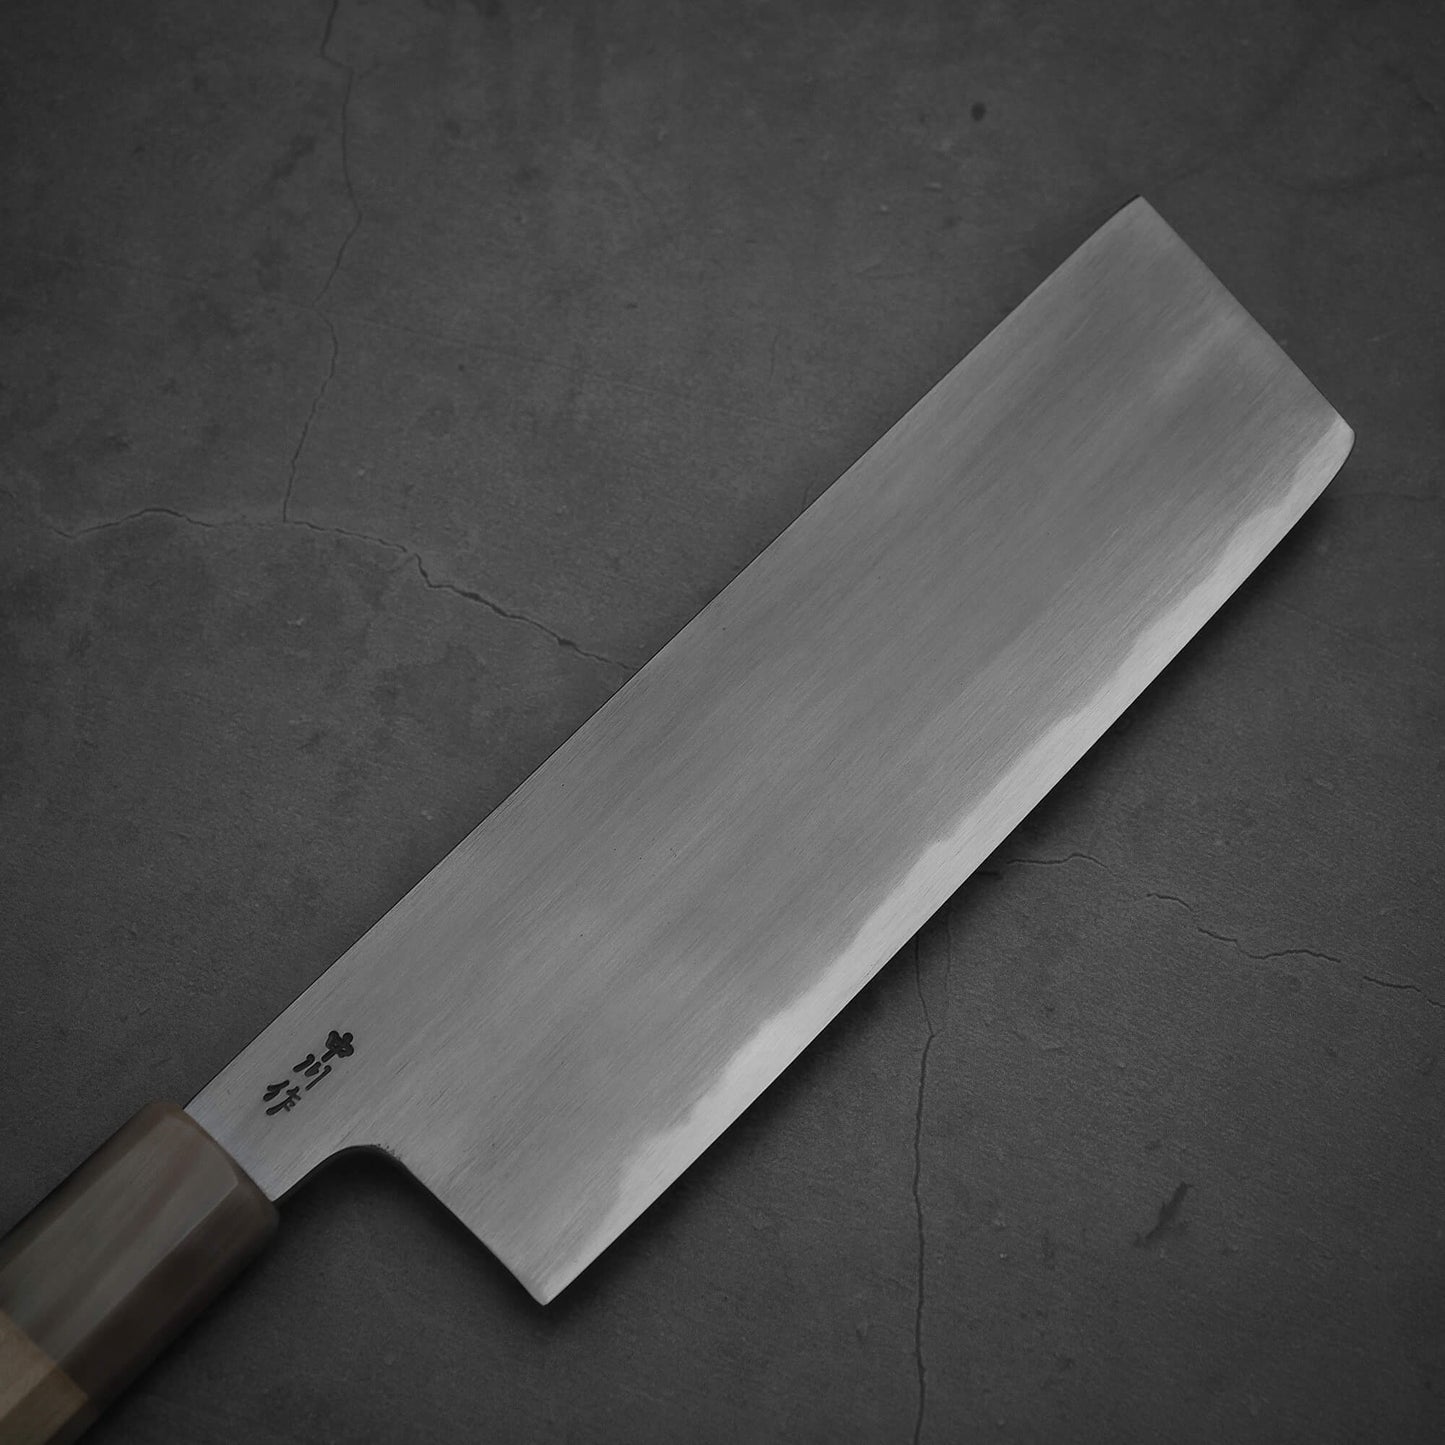 Top view of the right side of the blade of Nakagawa aogami#2 nakiri knife 